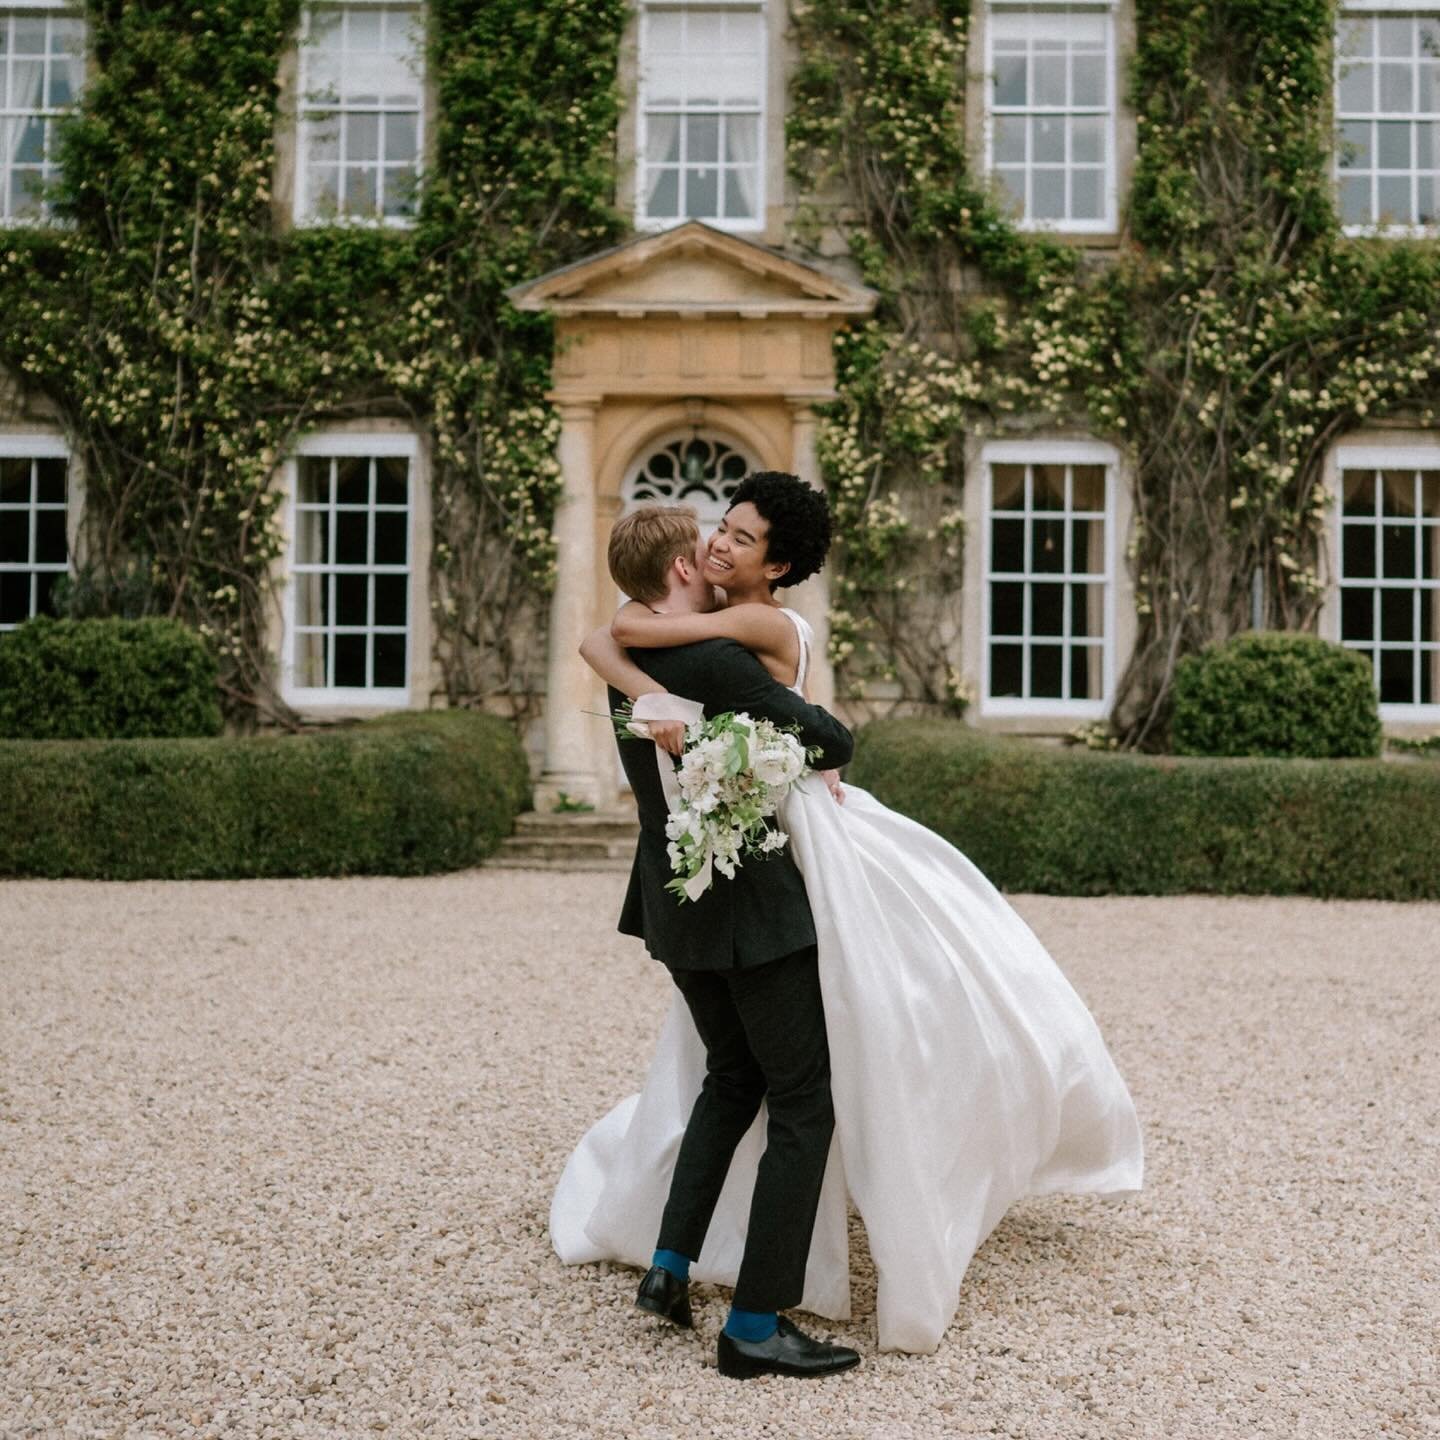 Last week was incredible!

I was super busy, but one of the things I got up to was visiting the amazing @cornwell_manor for the first time and wow what a gorgeous venue. 
Gorgeous gardens and the sun shone for us. 

I have so much to share from last 